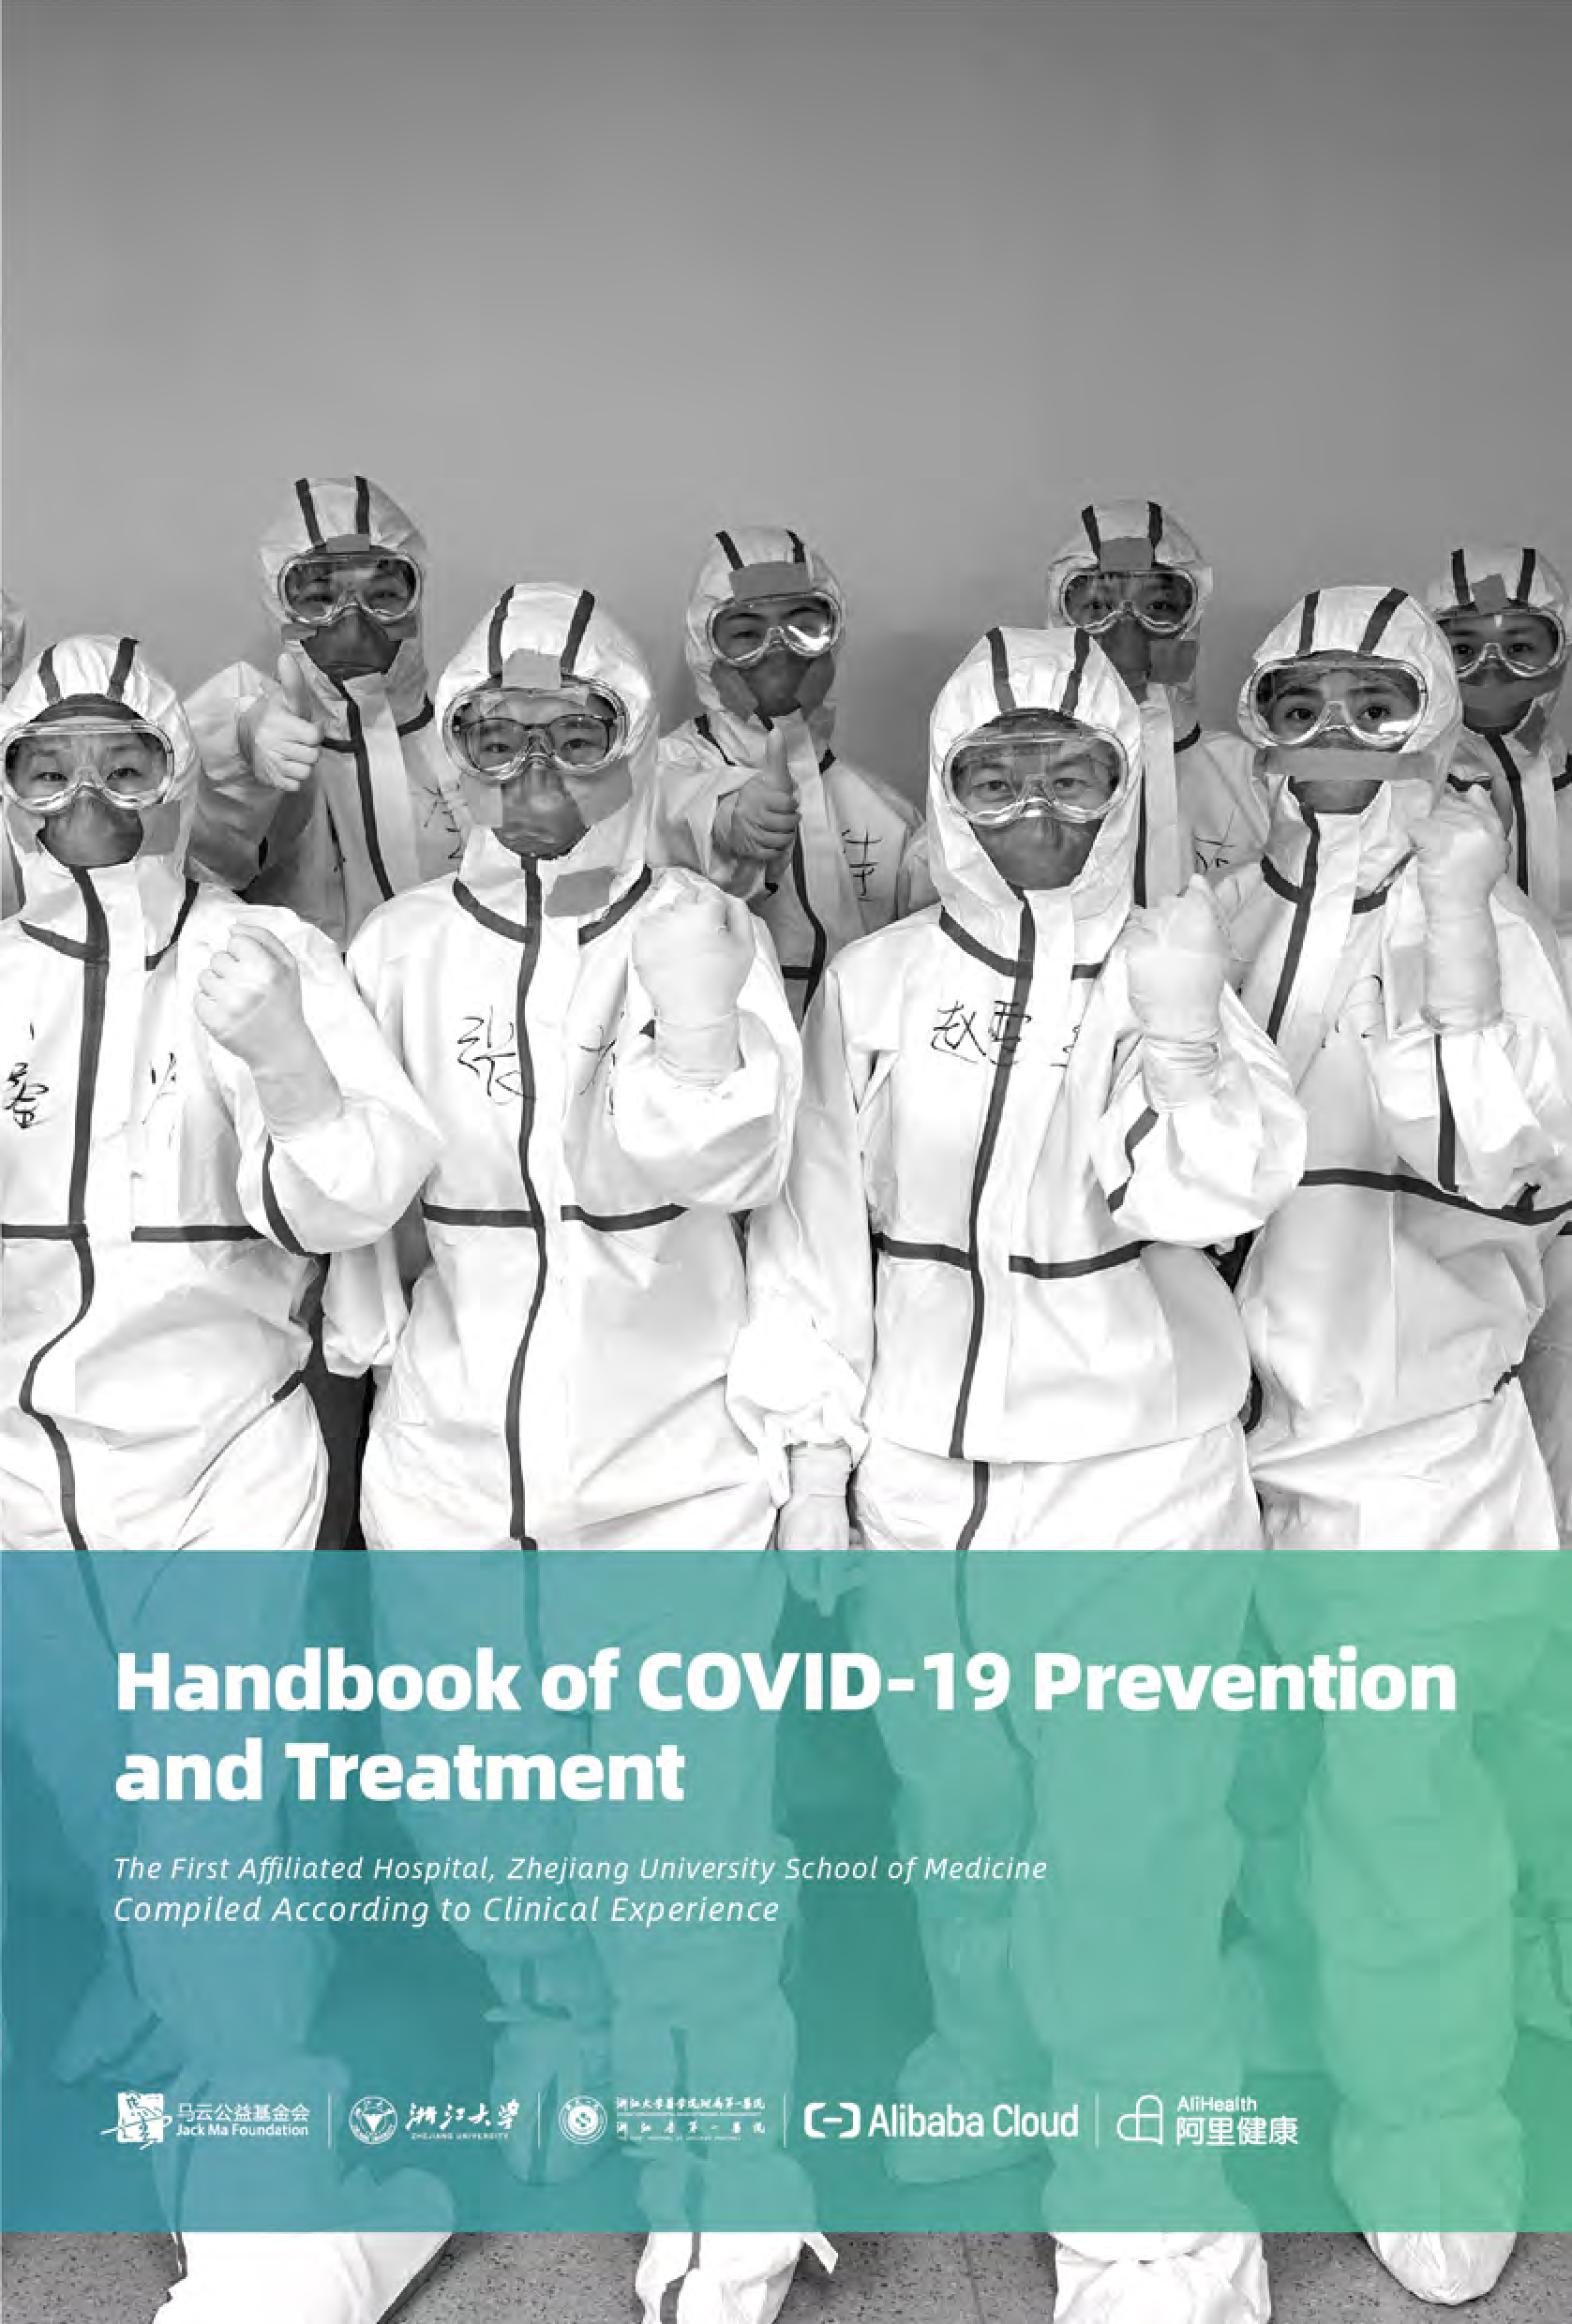 Handbook of COVID-19 Prevention and Treatment (EN) main image